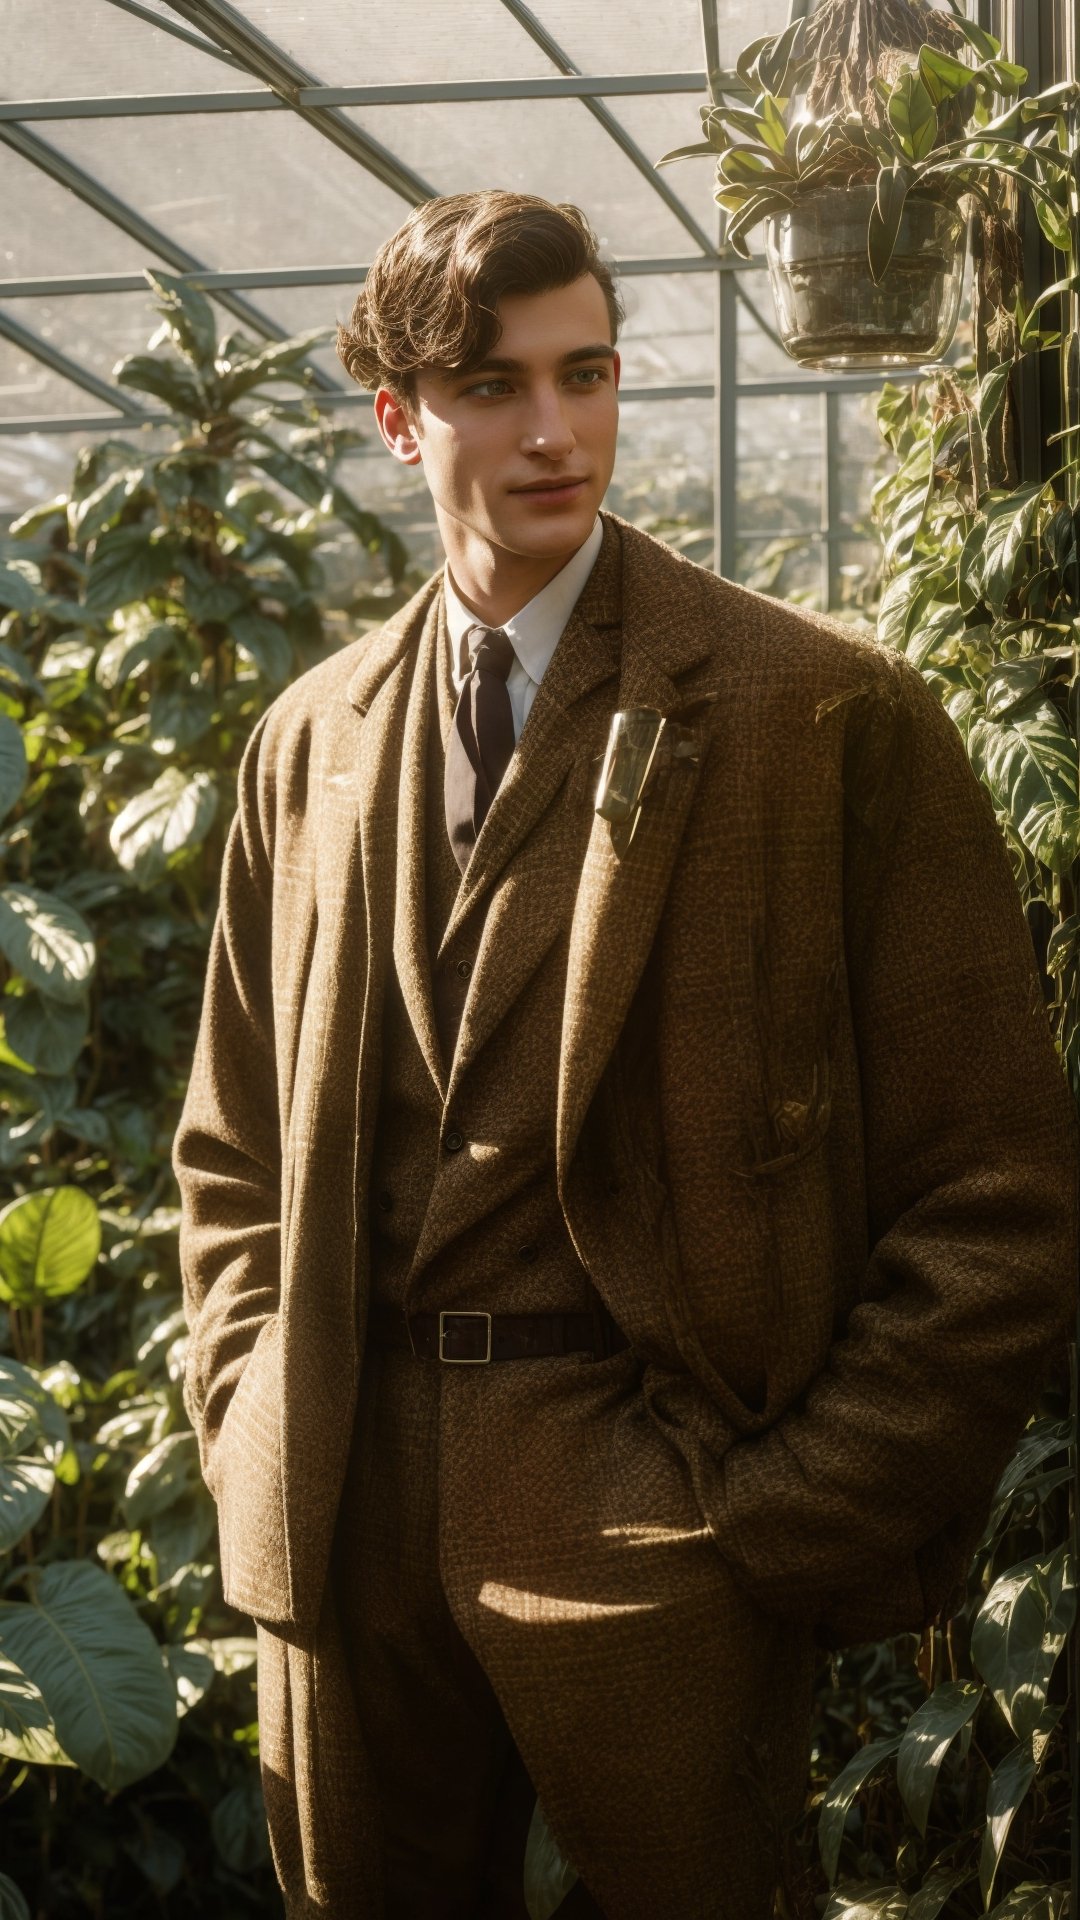  A young botanist in a tweed jacket tends to exotic plants in his vintage glasshouse. Sunlight filters through the glass, casting vibrant shadows on his work-worn hands. Candid, dedicated, high resolution.,ViNtAgE,photorealistic,Masterpiece,Detailedface